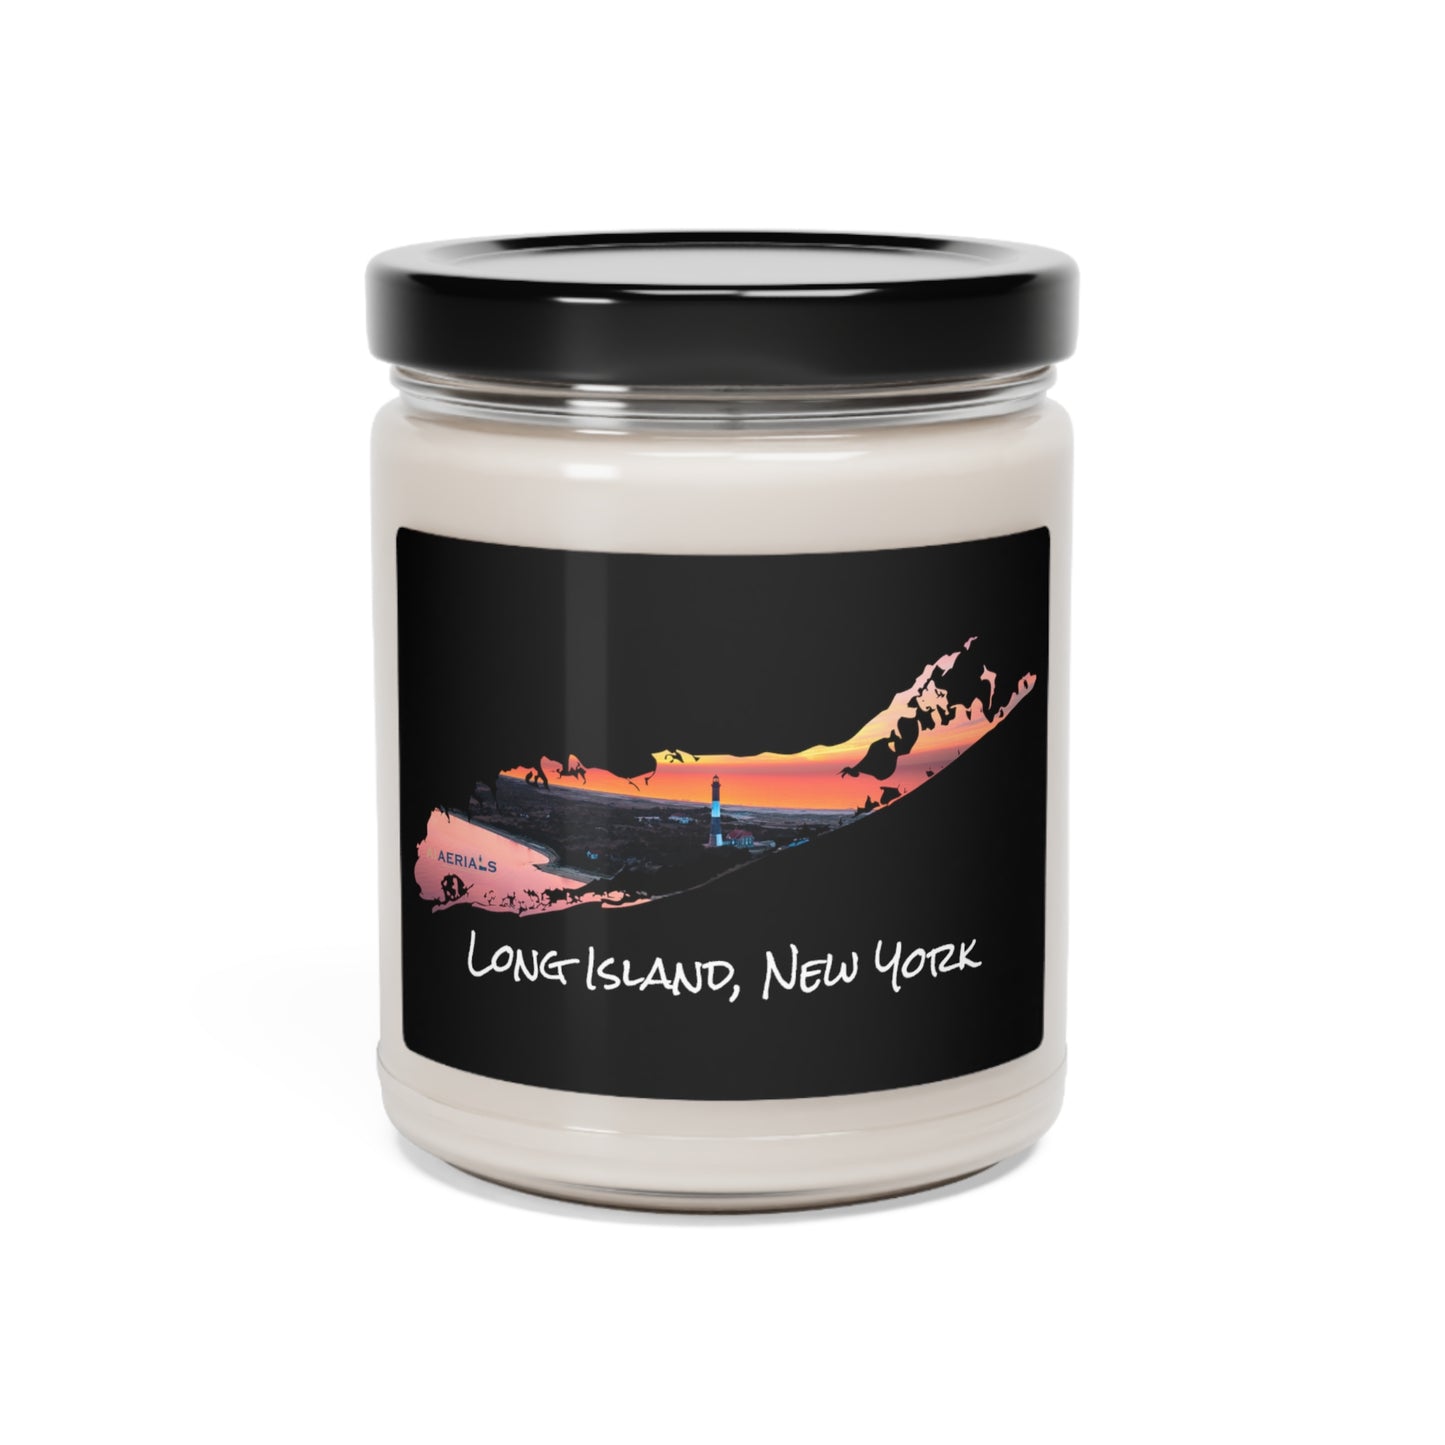 Scented Soy Candle, 9oz Black - Fire Island Lighthouse